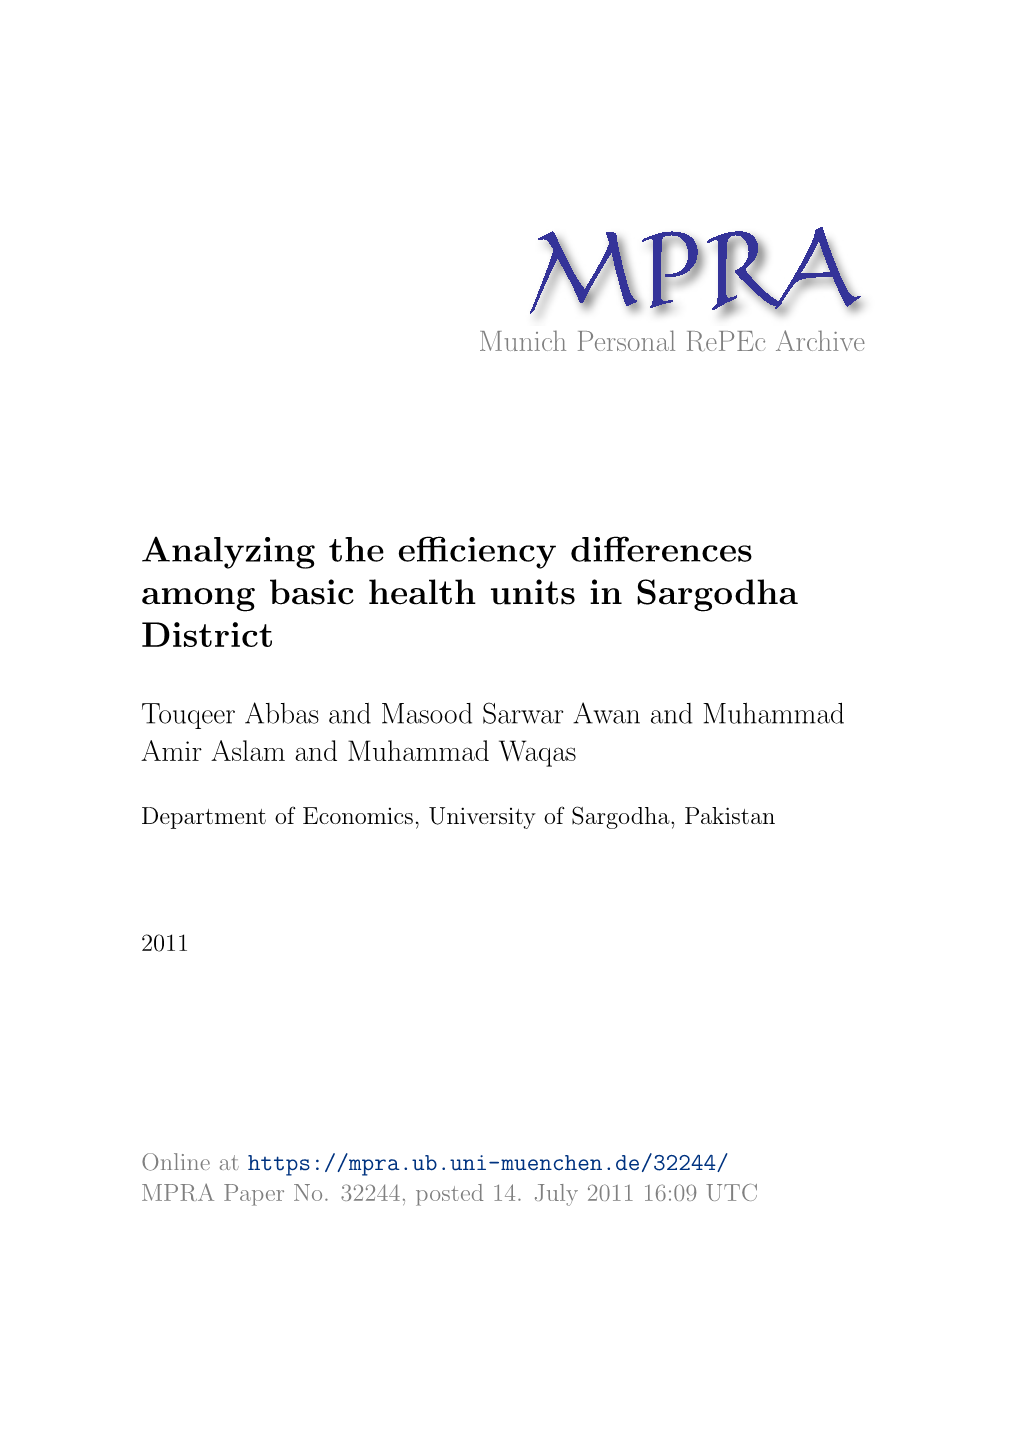 Analyzing the Efficiency Differences Among Basic Health Units in Sargodha District